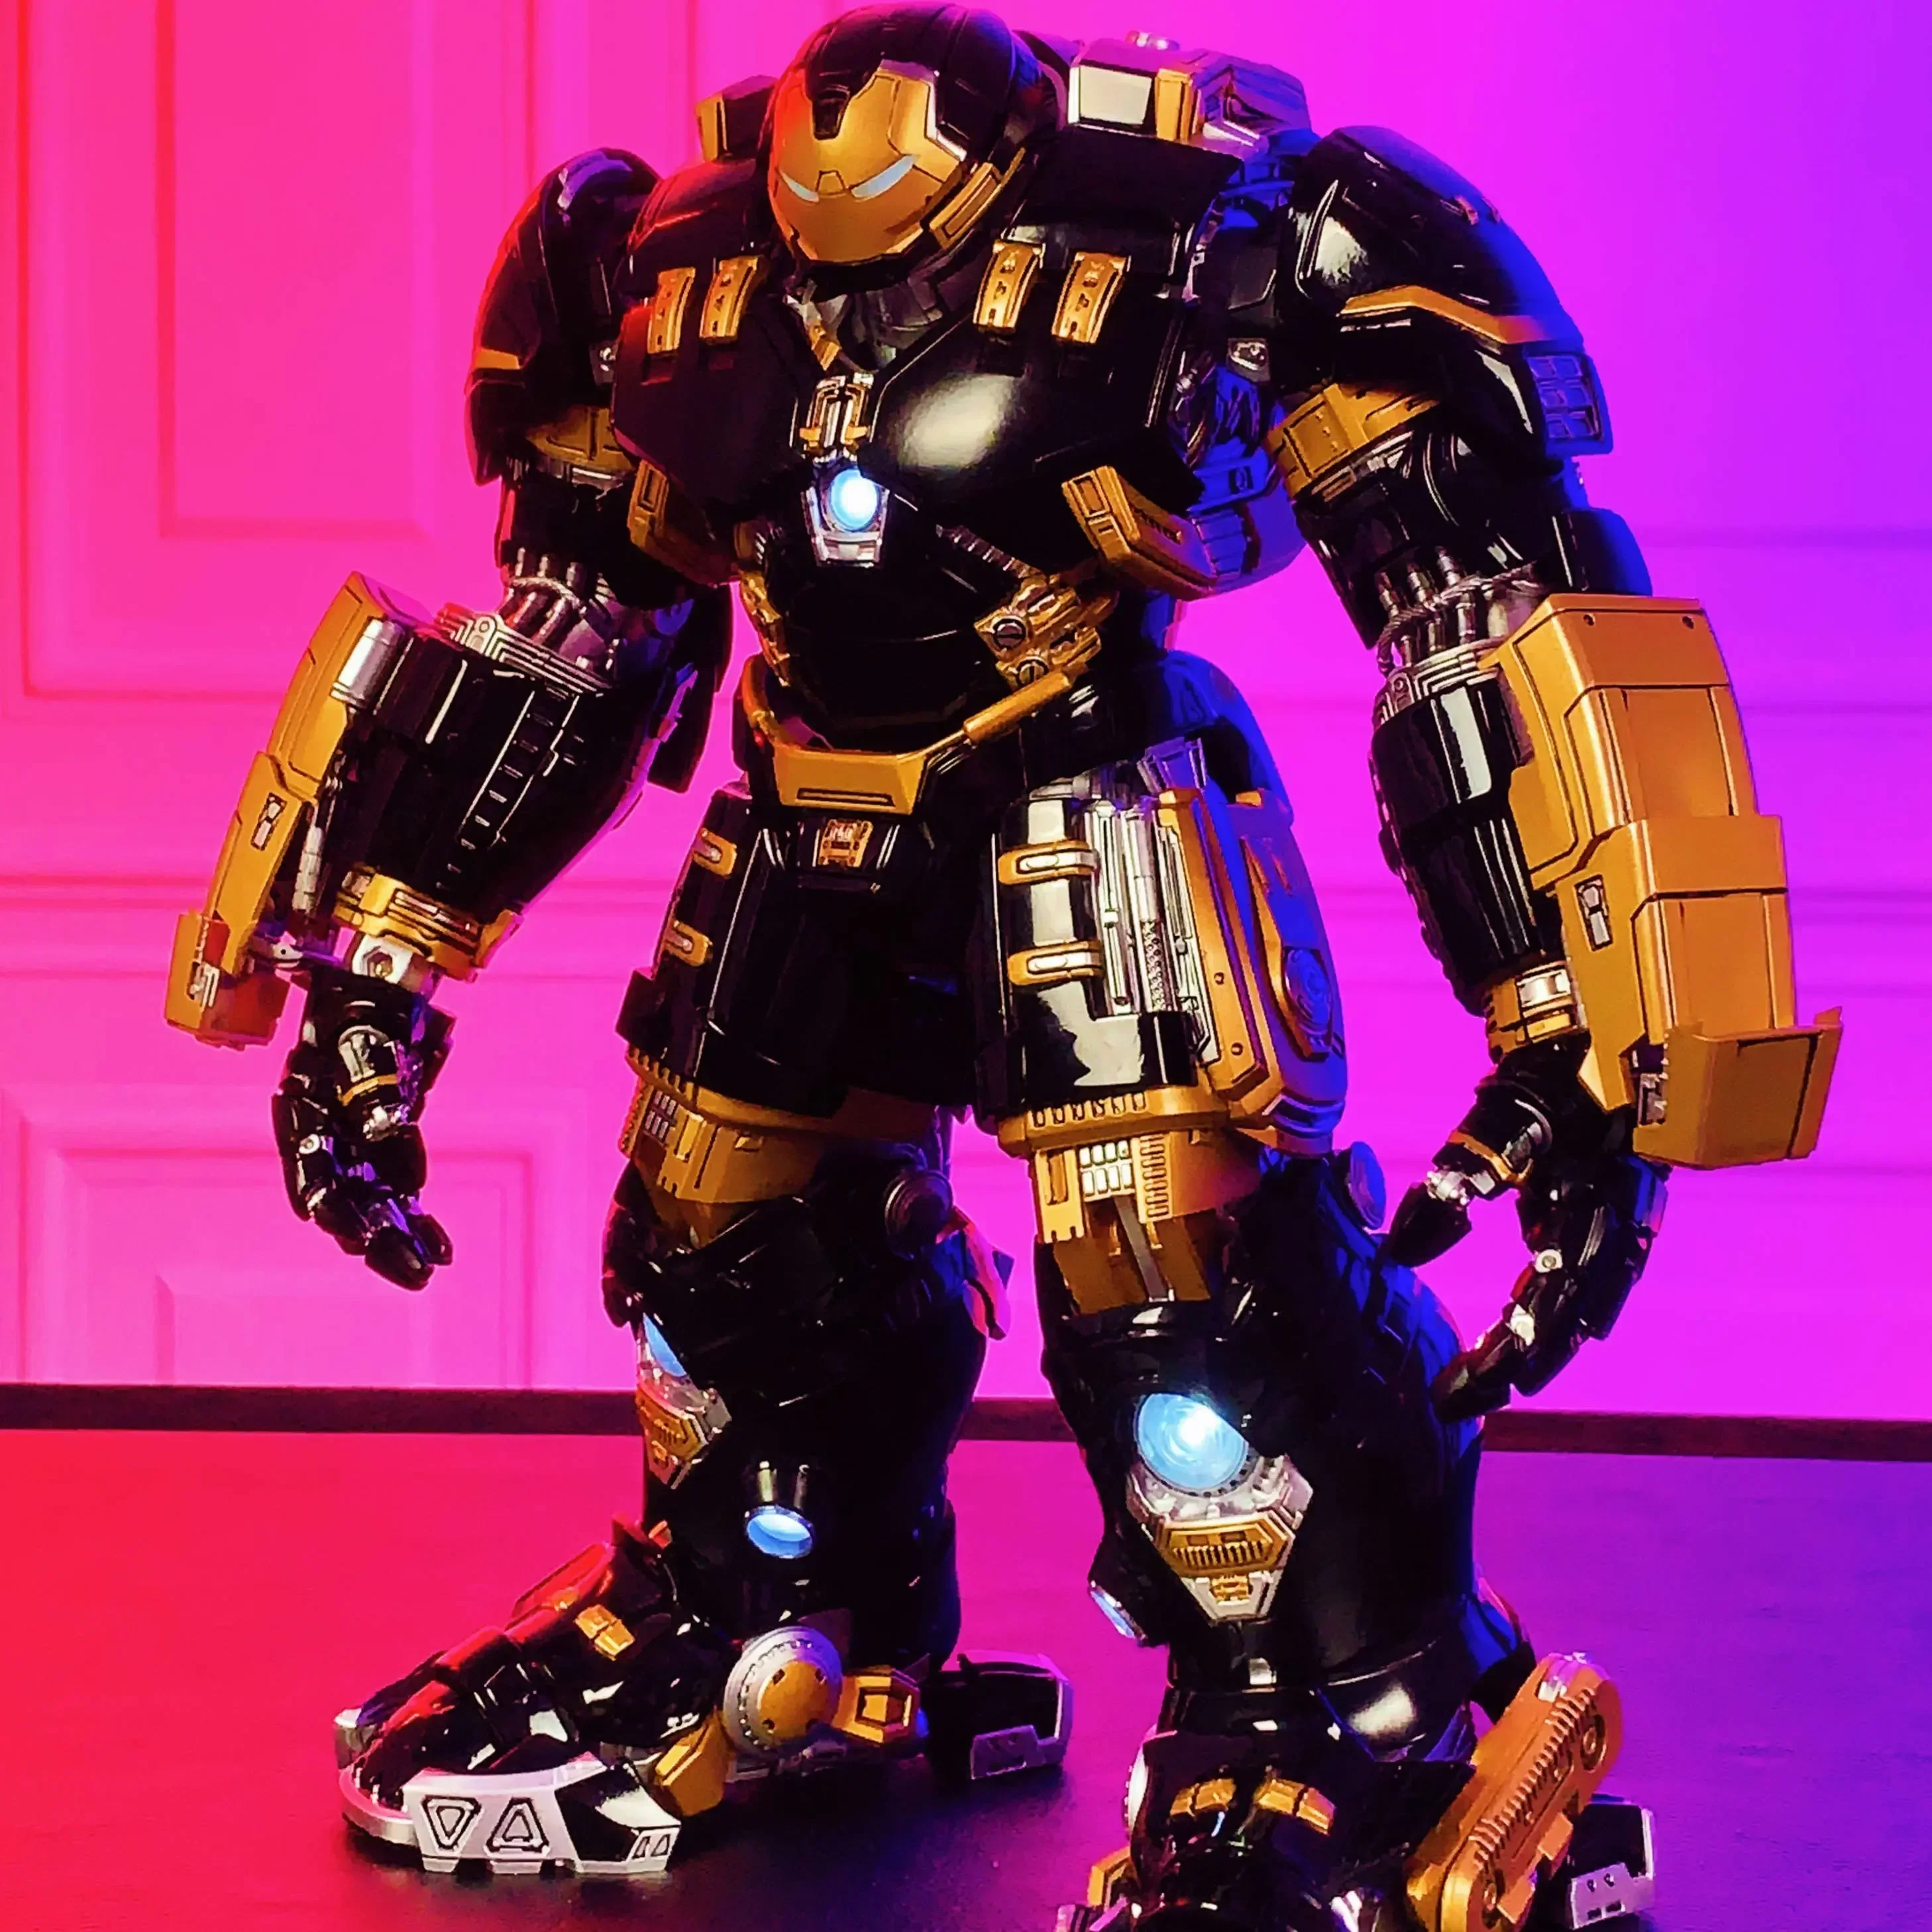 comicave-marvel-the-avengers-iron-man-mk44-hulkbuster-collection-anime-action-figures-alloy-model-toy-for-boys-xmas-gift